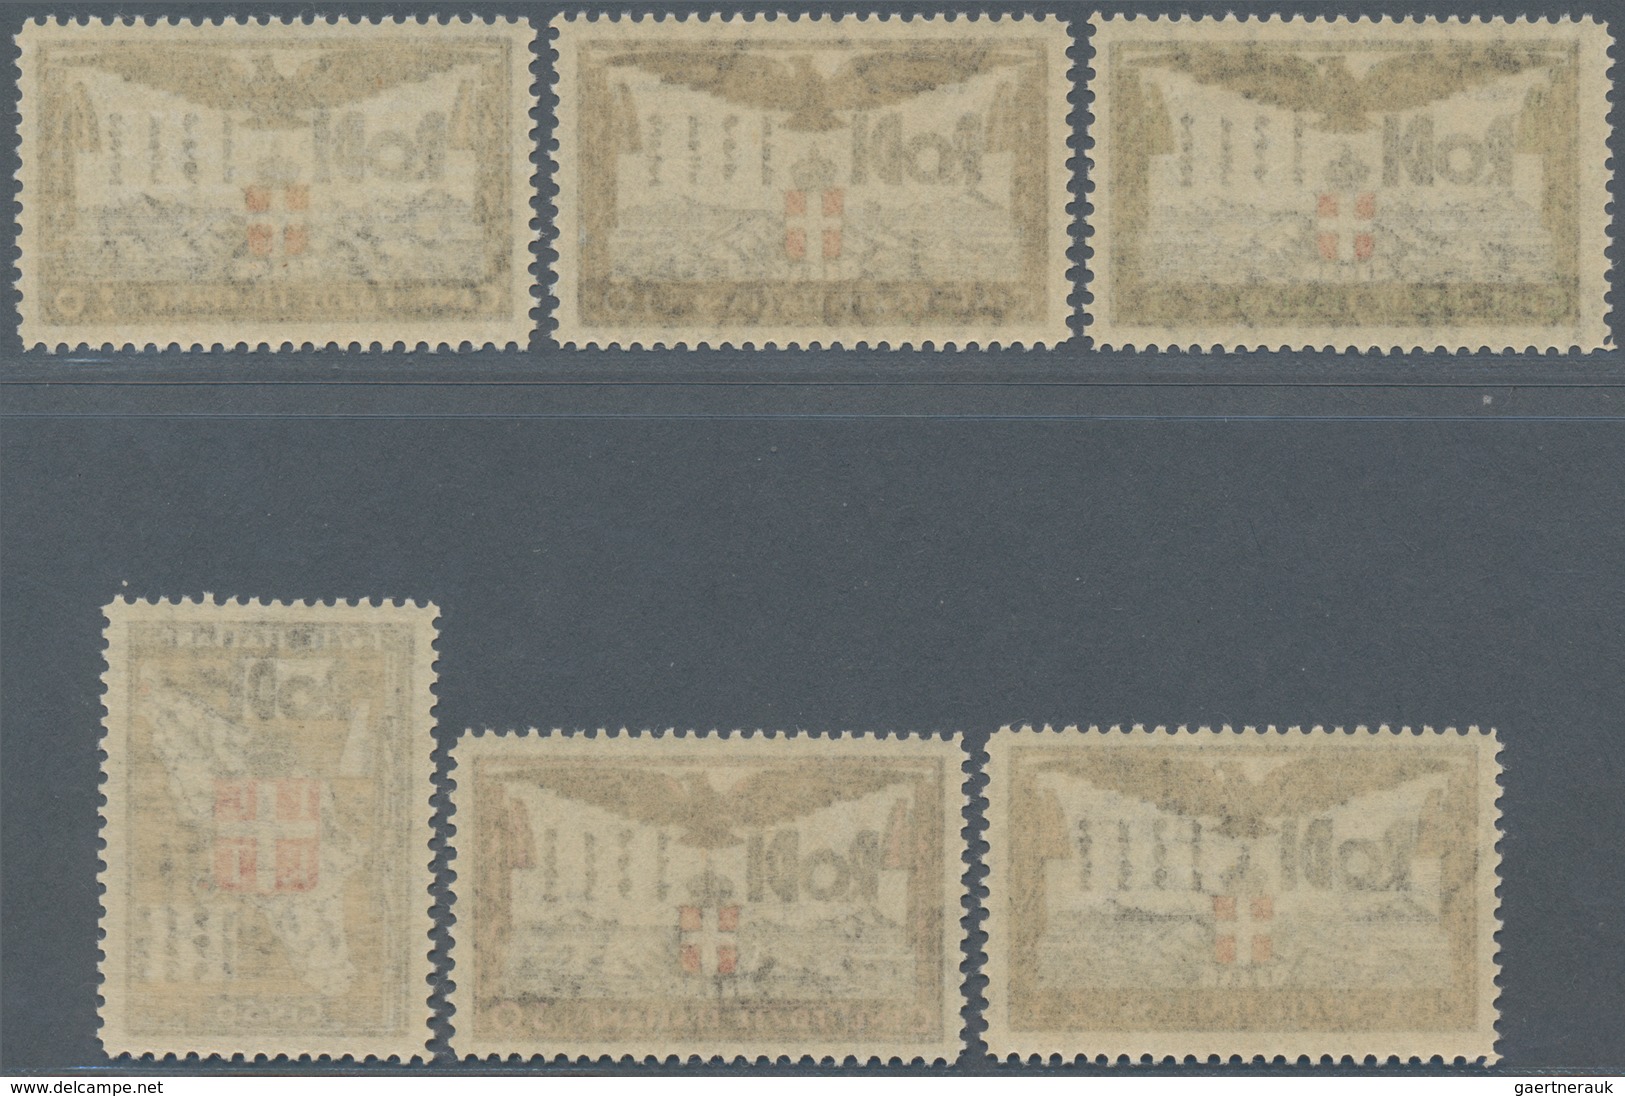 Ägäische Inseln: RODI: 1932, 5 C To 25 L Ten Stamps Mint Never Hinged, Very Small Edition - Egée